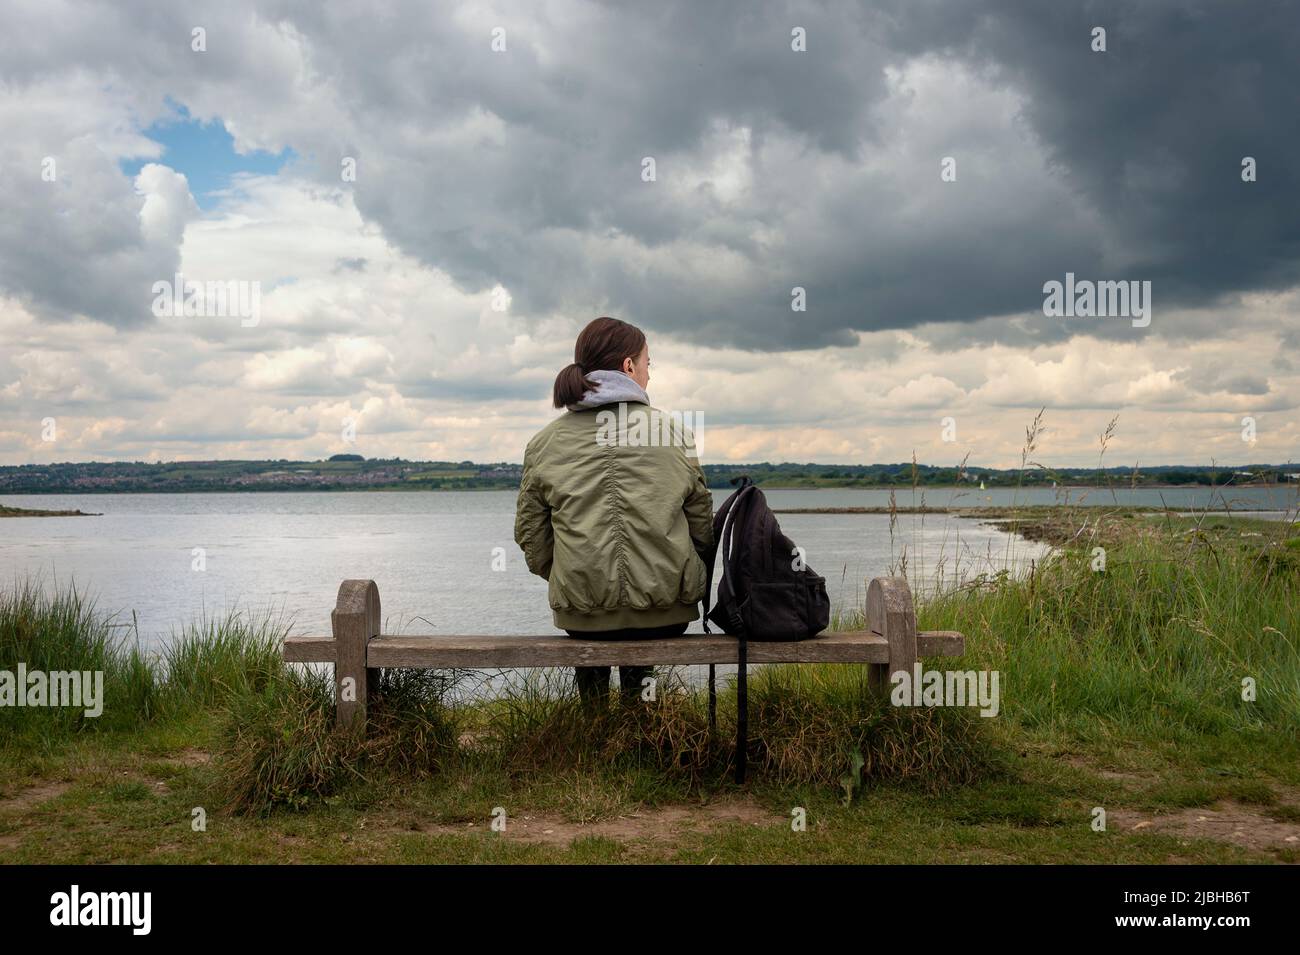 Rear view of a woman sitting on a bench alone looking at the view across the water, stormy sky. Stock Photo